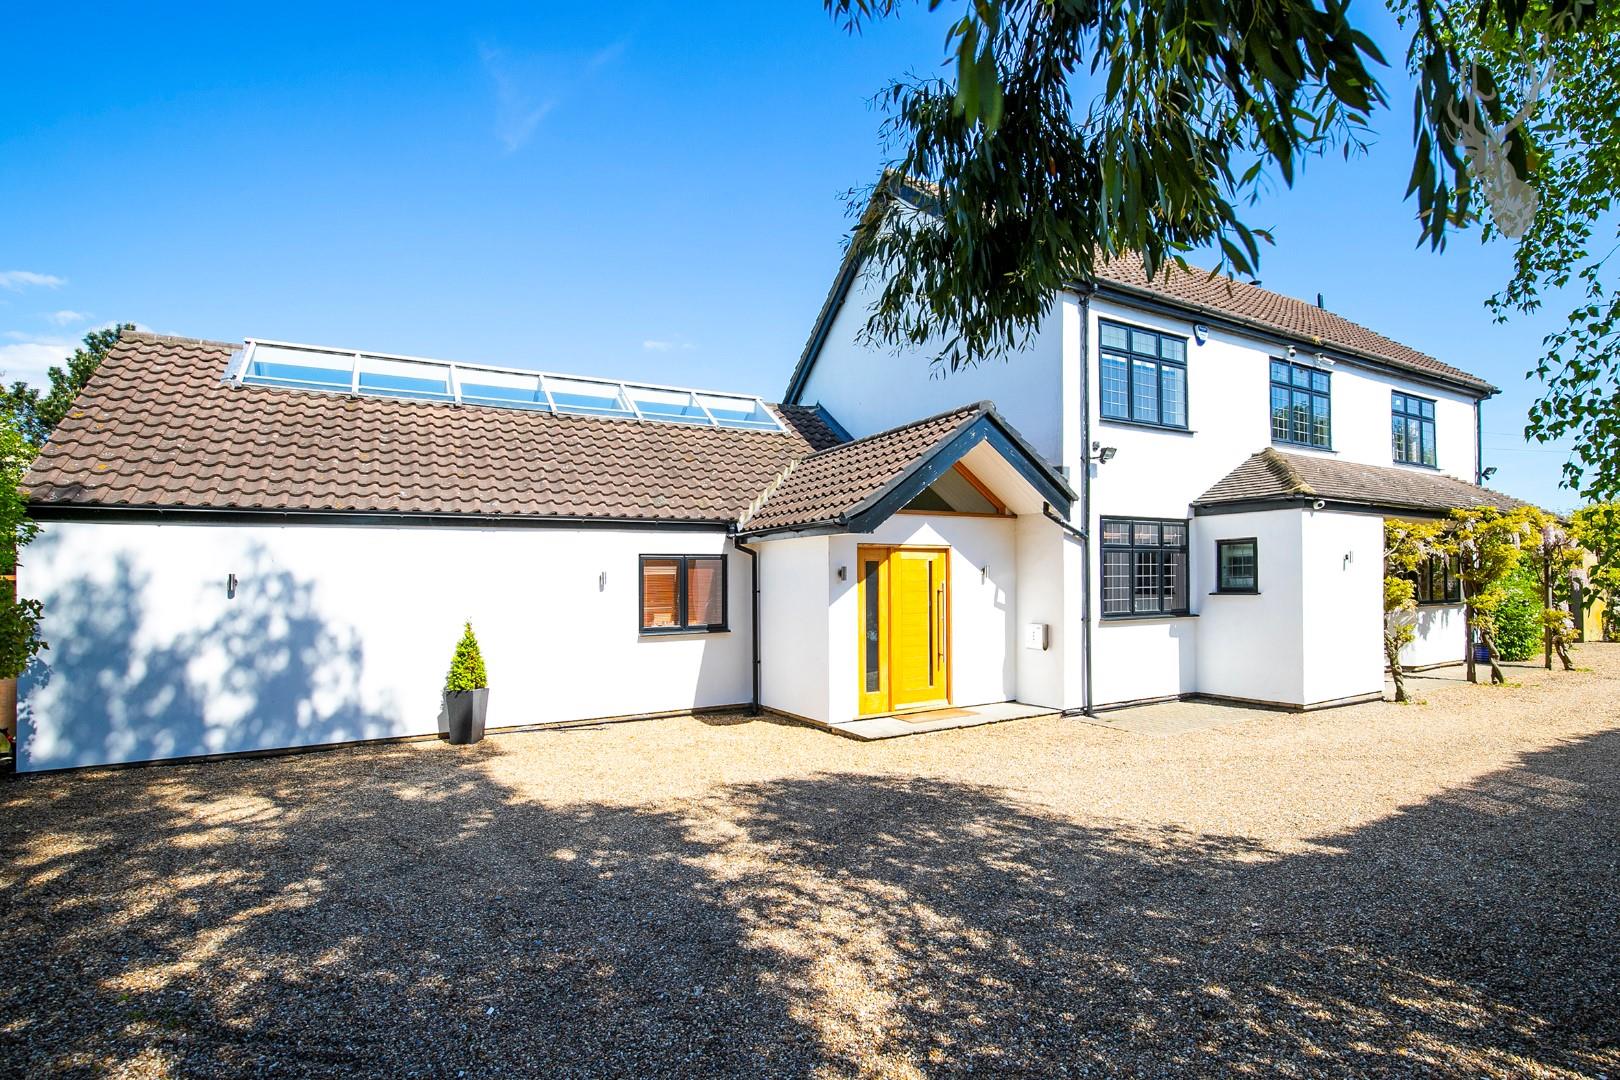 Similar Property: House - Detached in Broadley Common